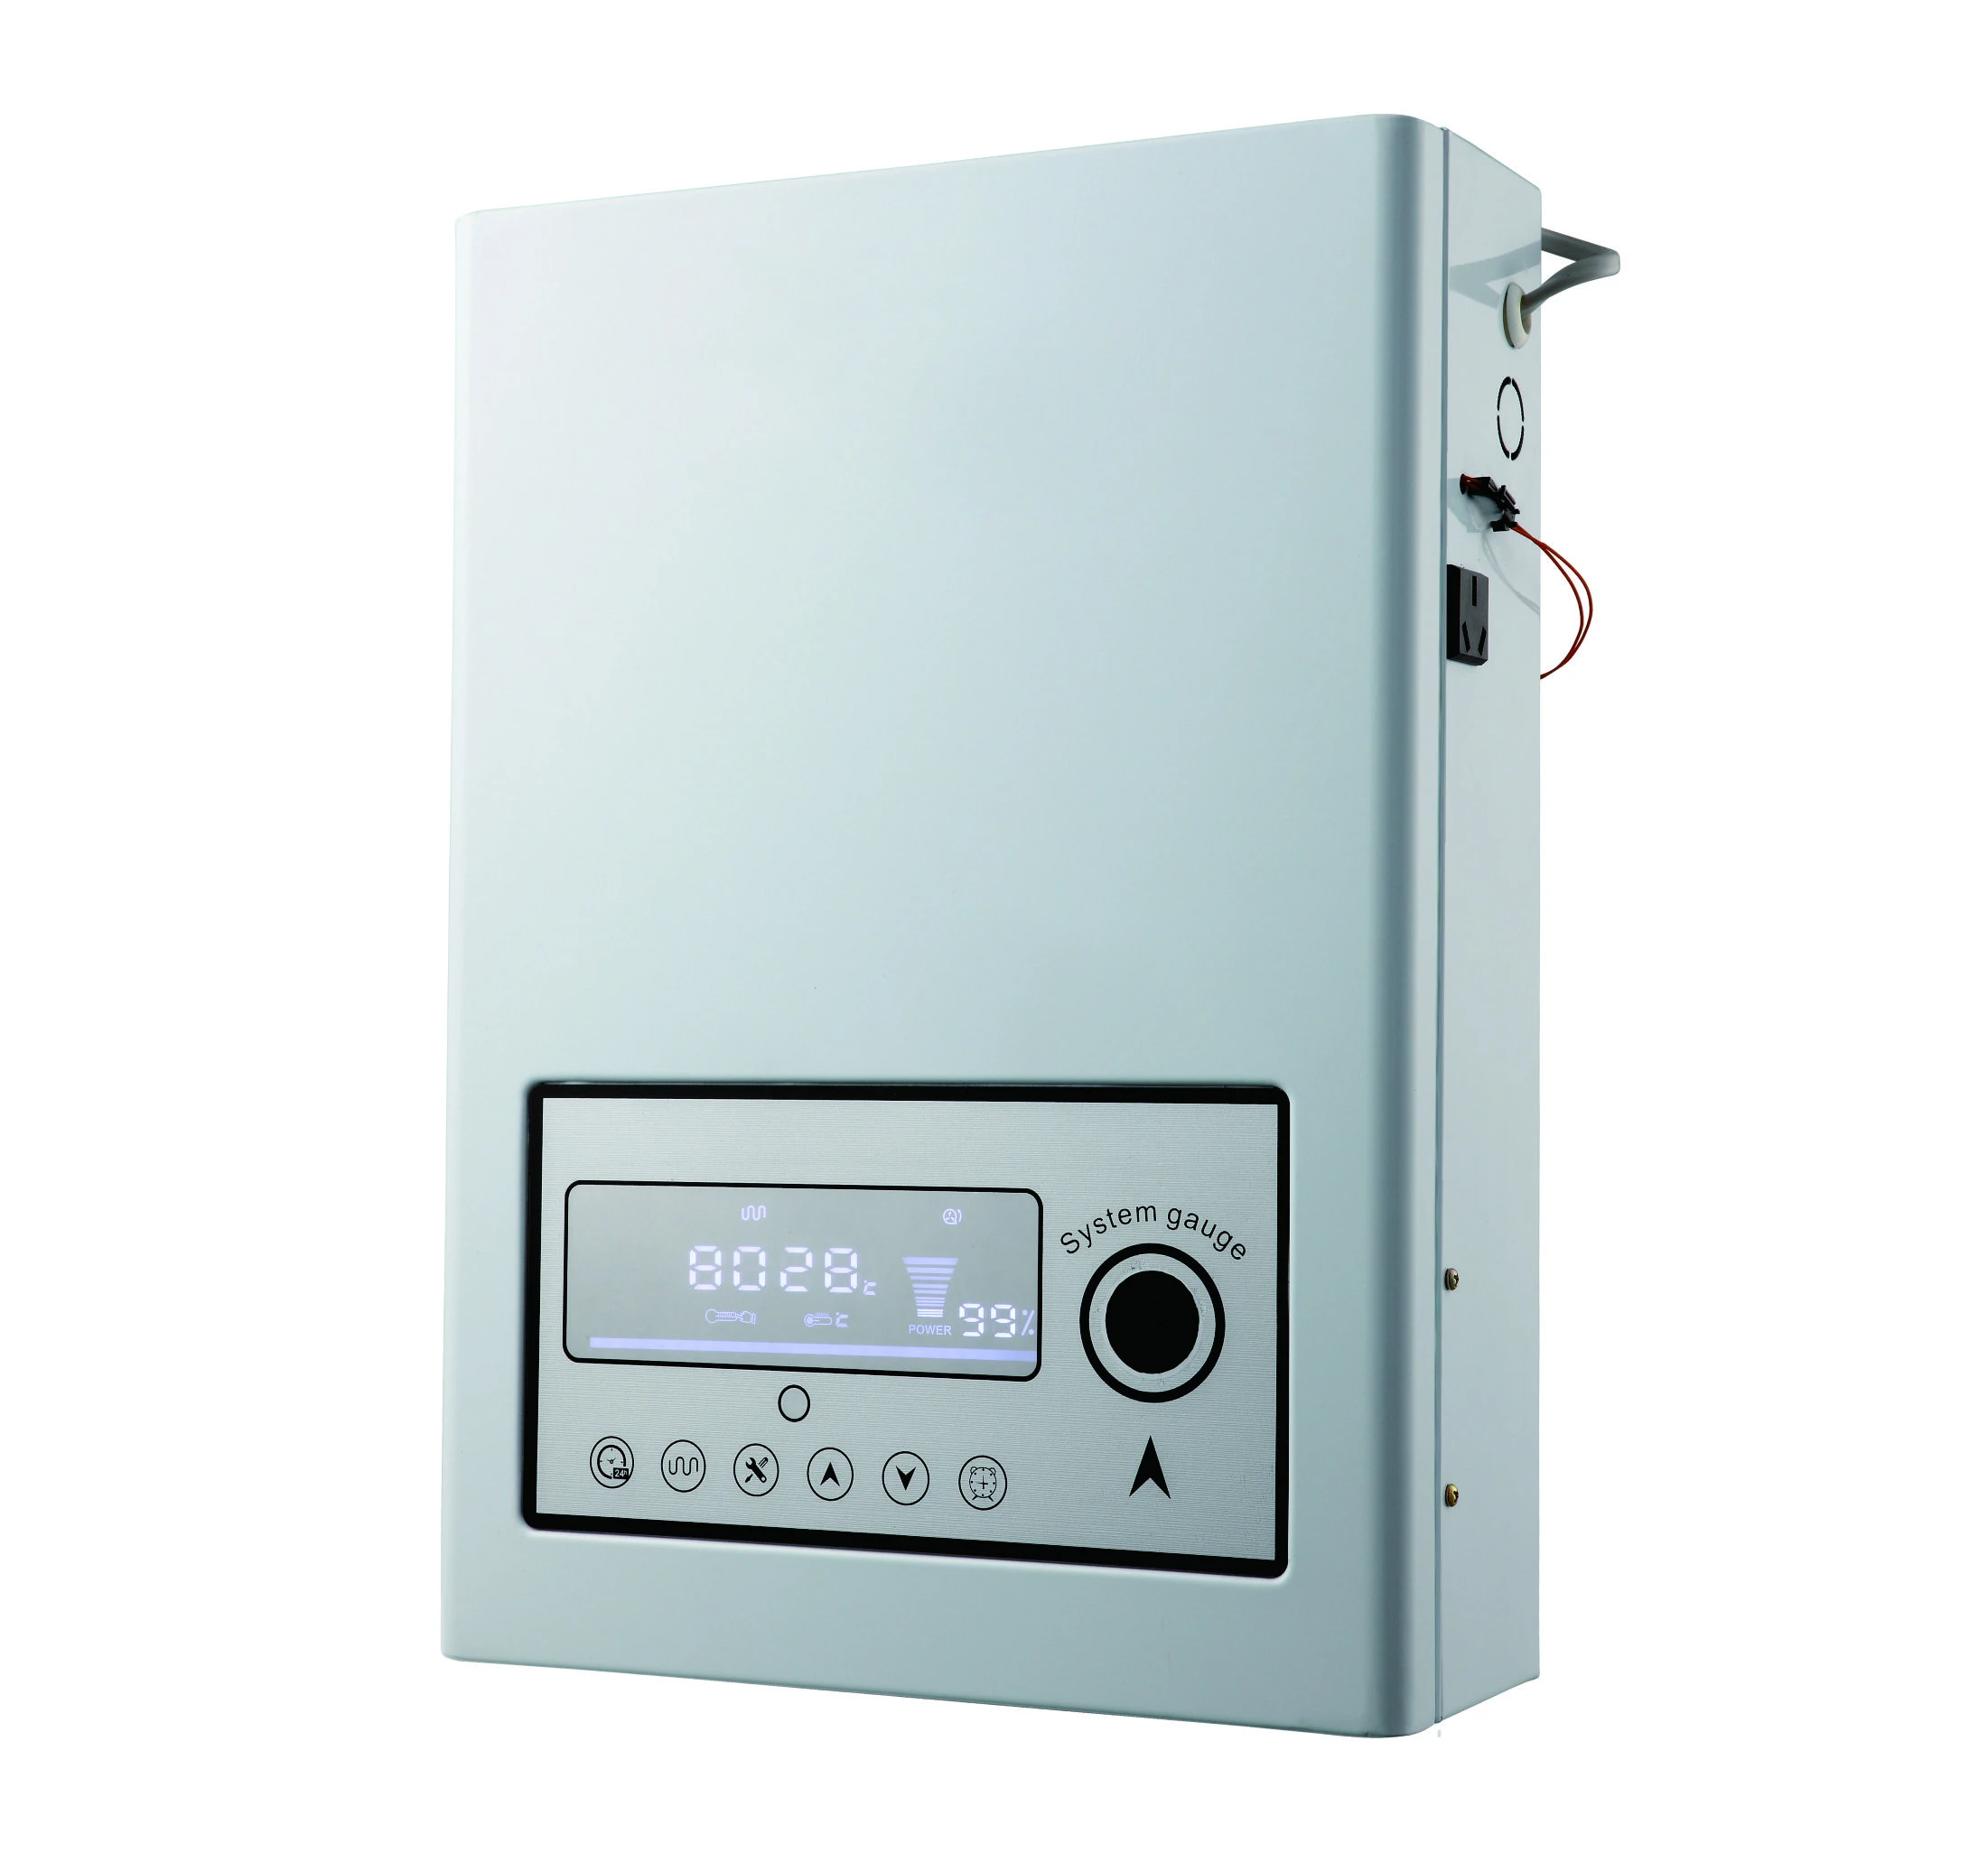 Mini size smart Wall Mounted electric boiler for underfloor heating